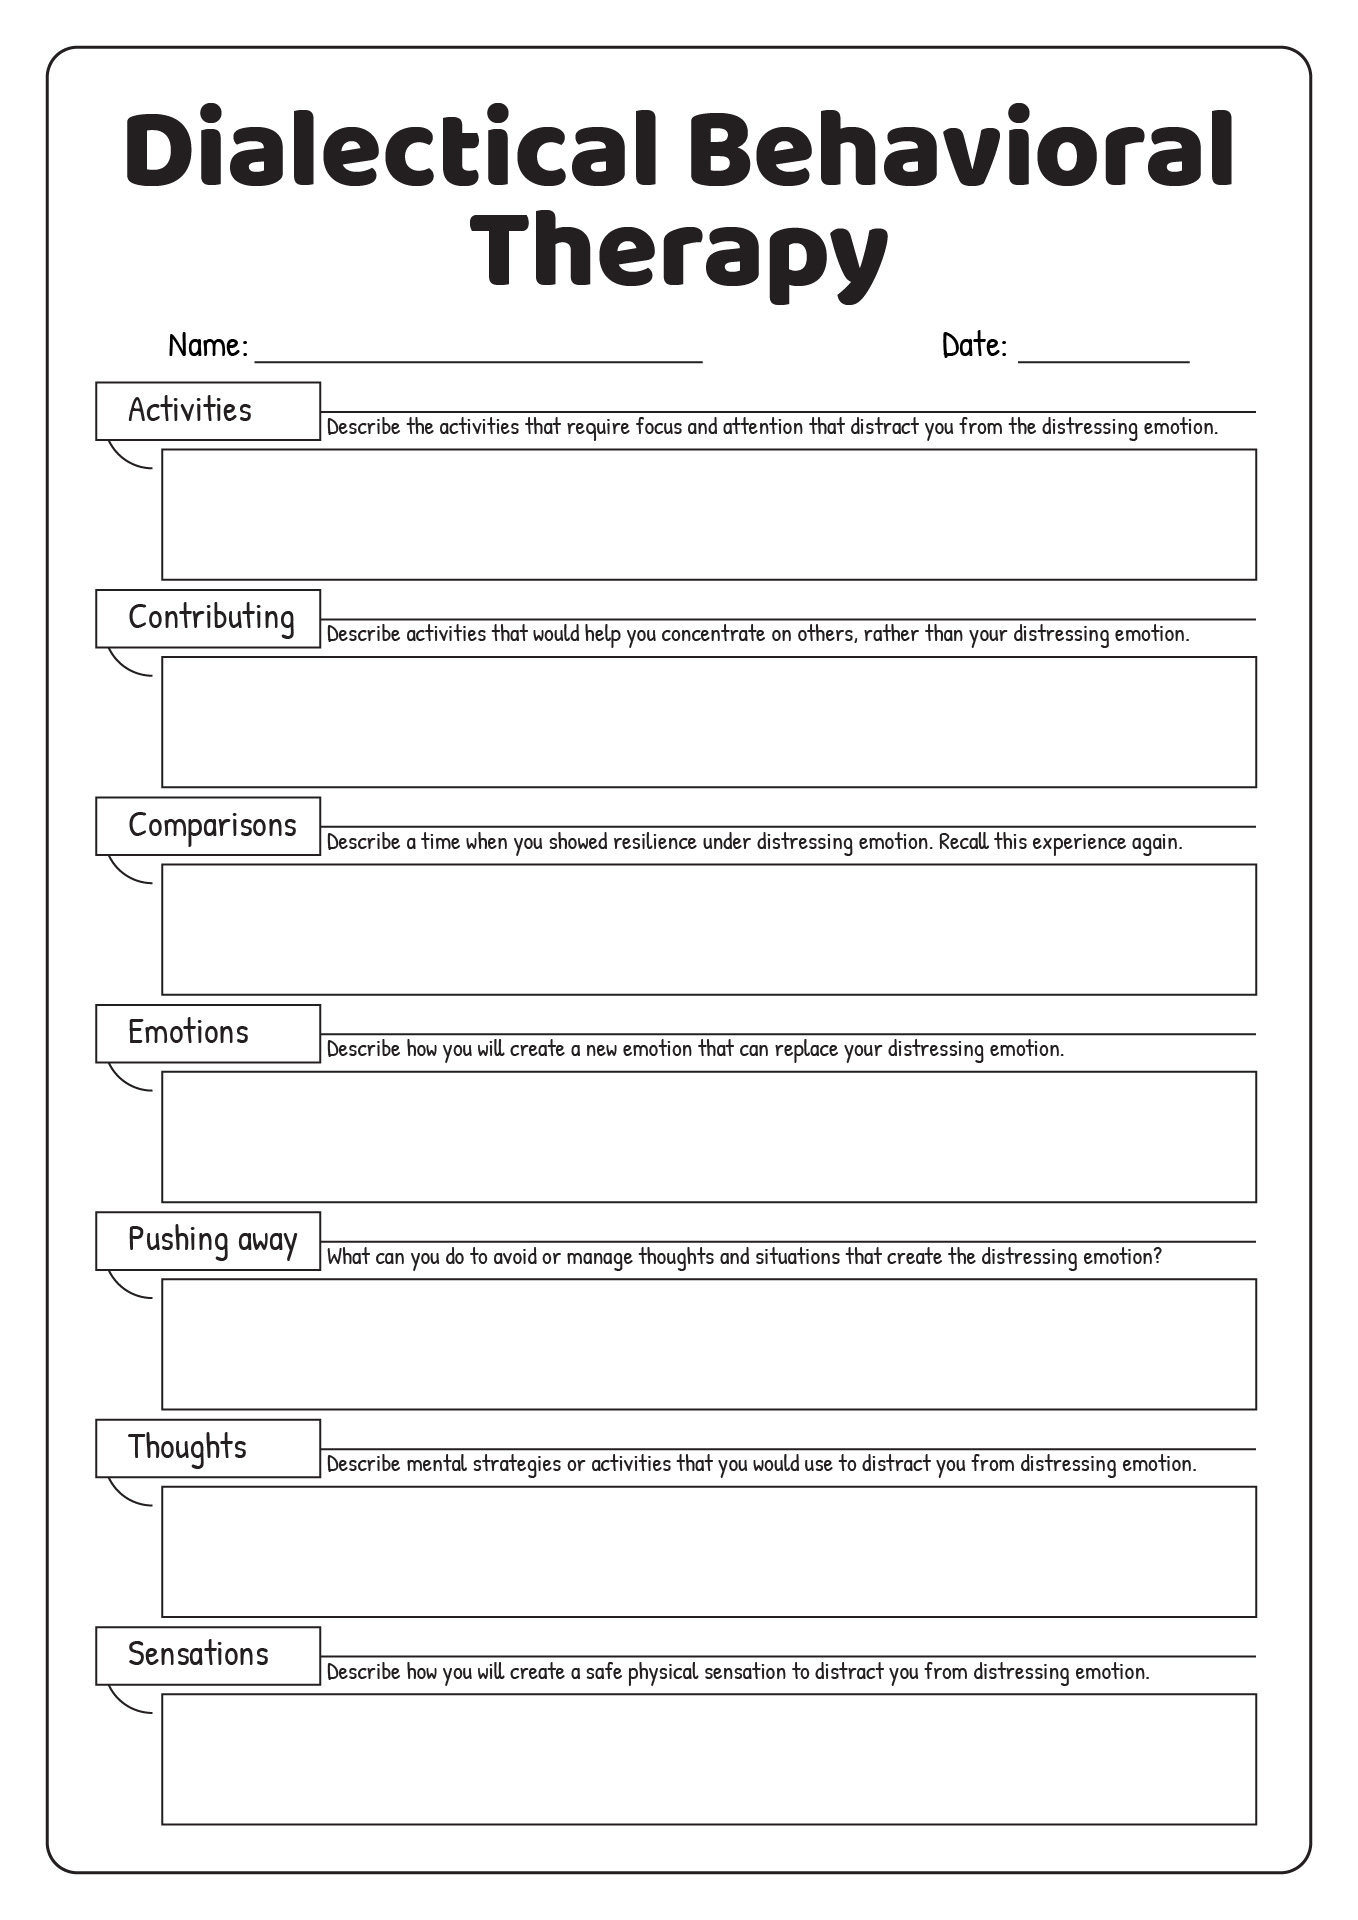 Dialectical Behavioral Therapy Worksheets Image